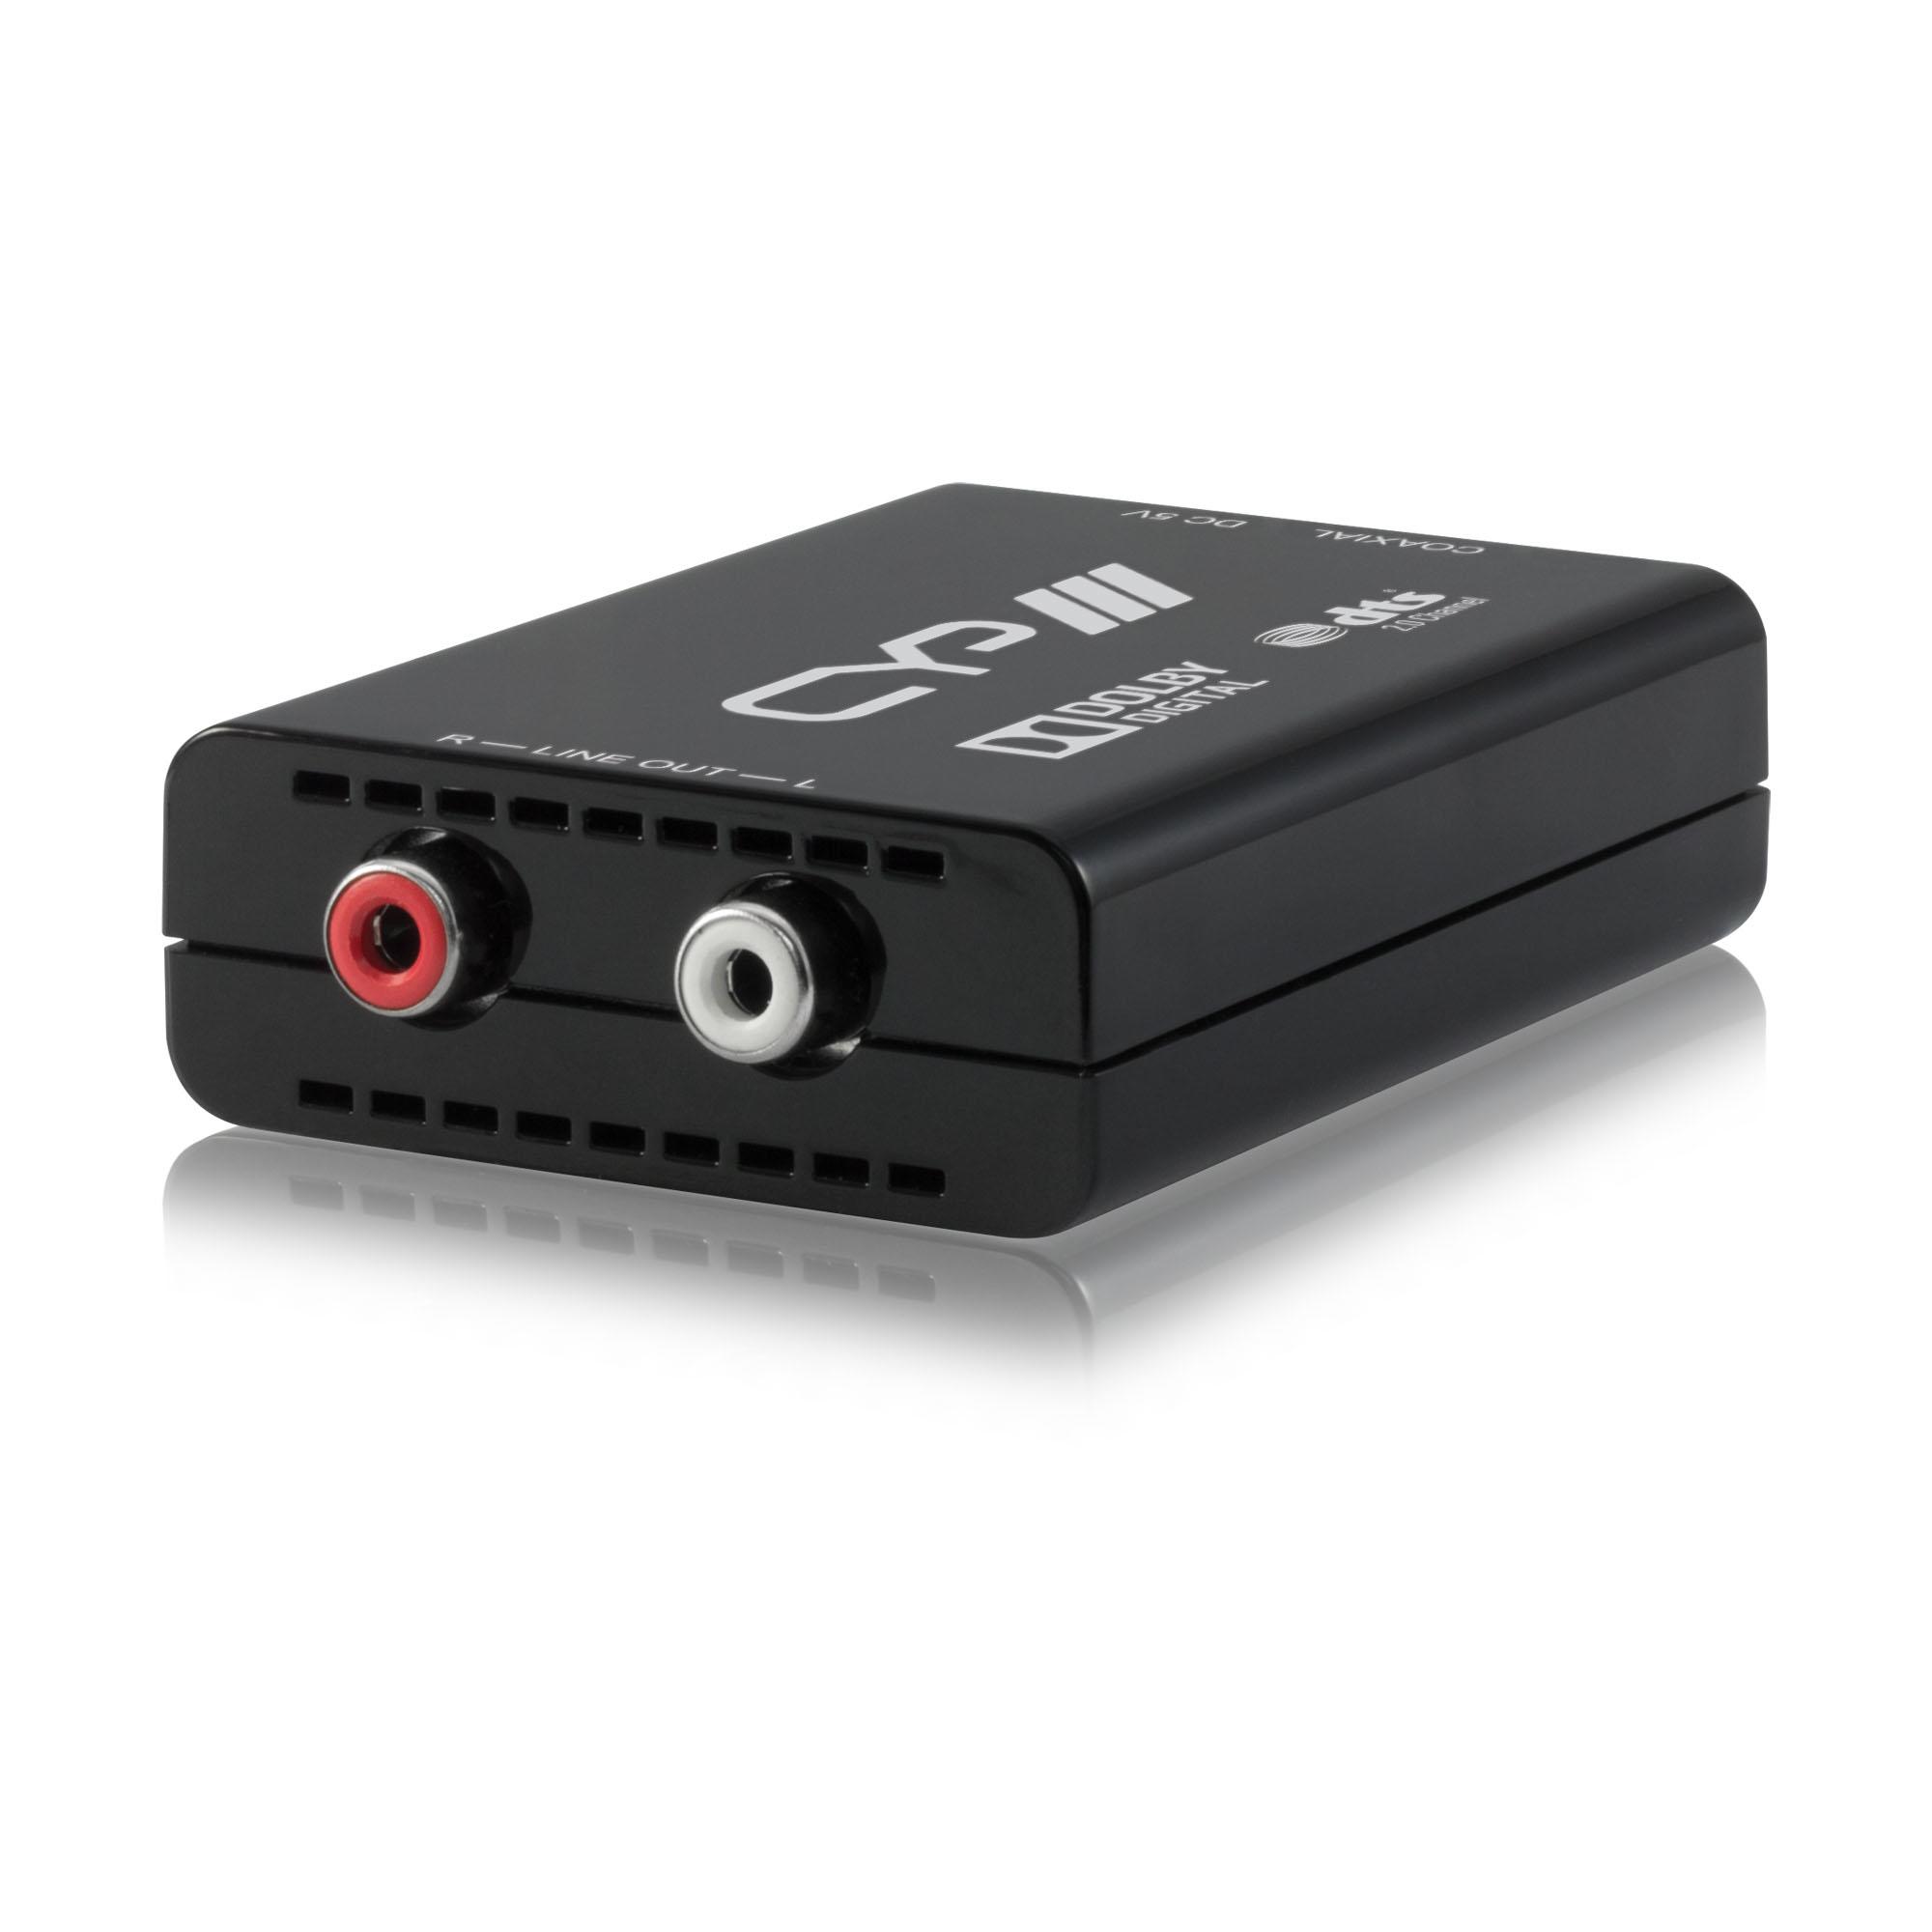 AU-D5D Coaxial to L/R Stereo Audio Converter (DAC) with Dolby/DTS Digital Decoder